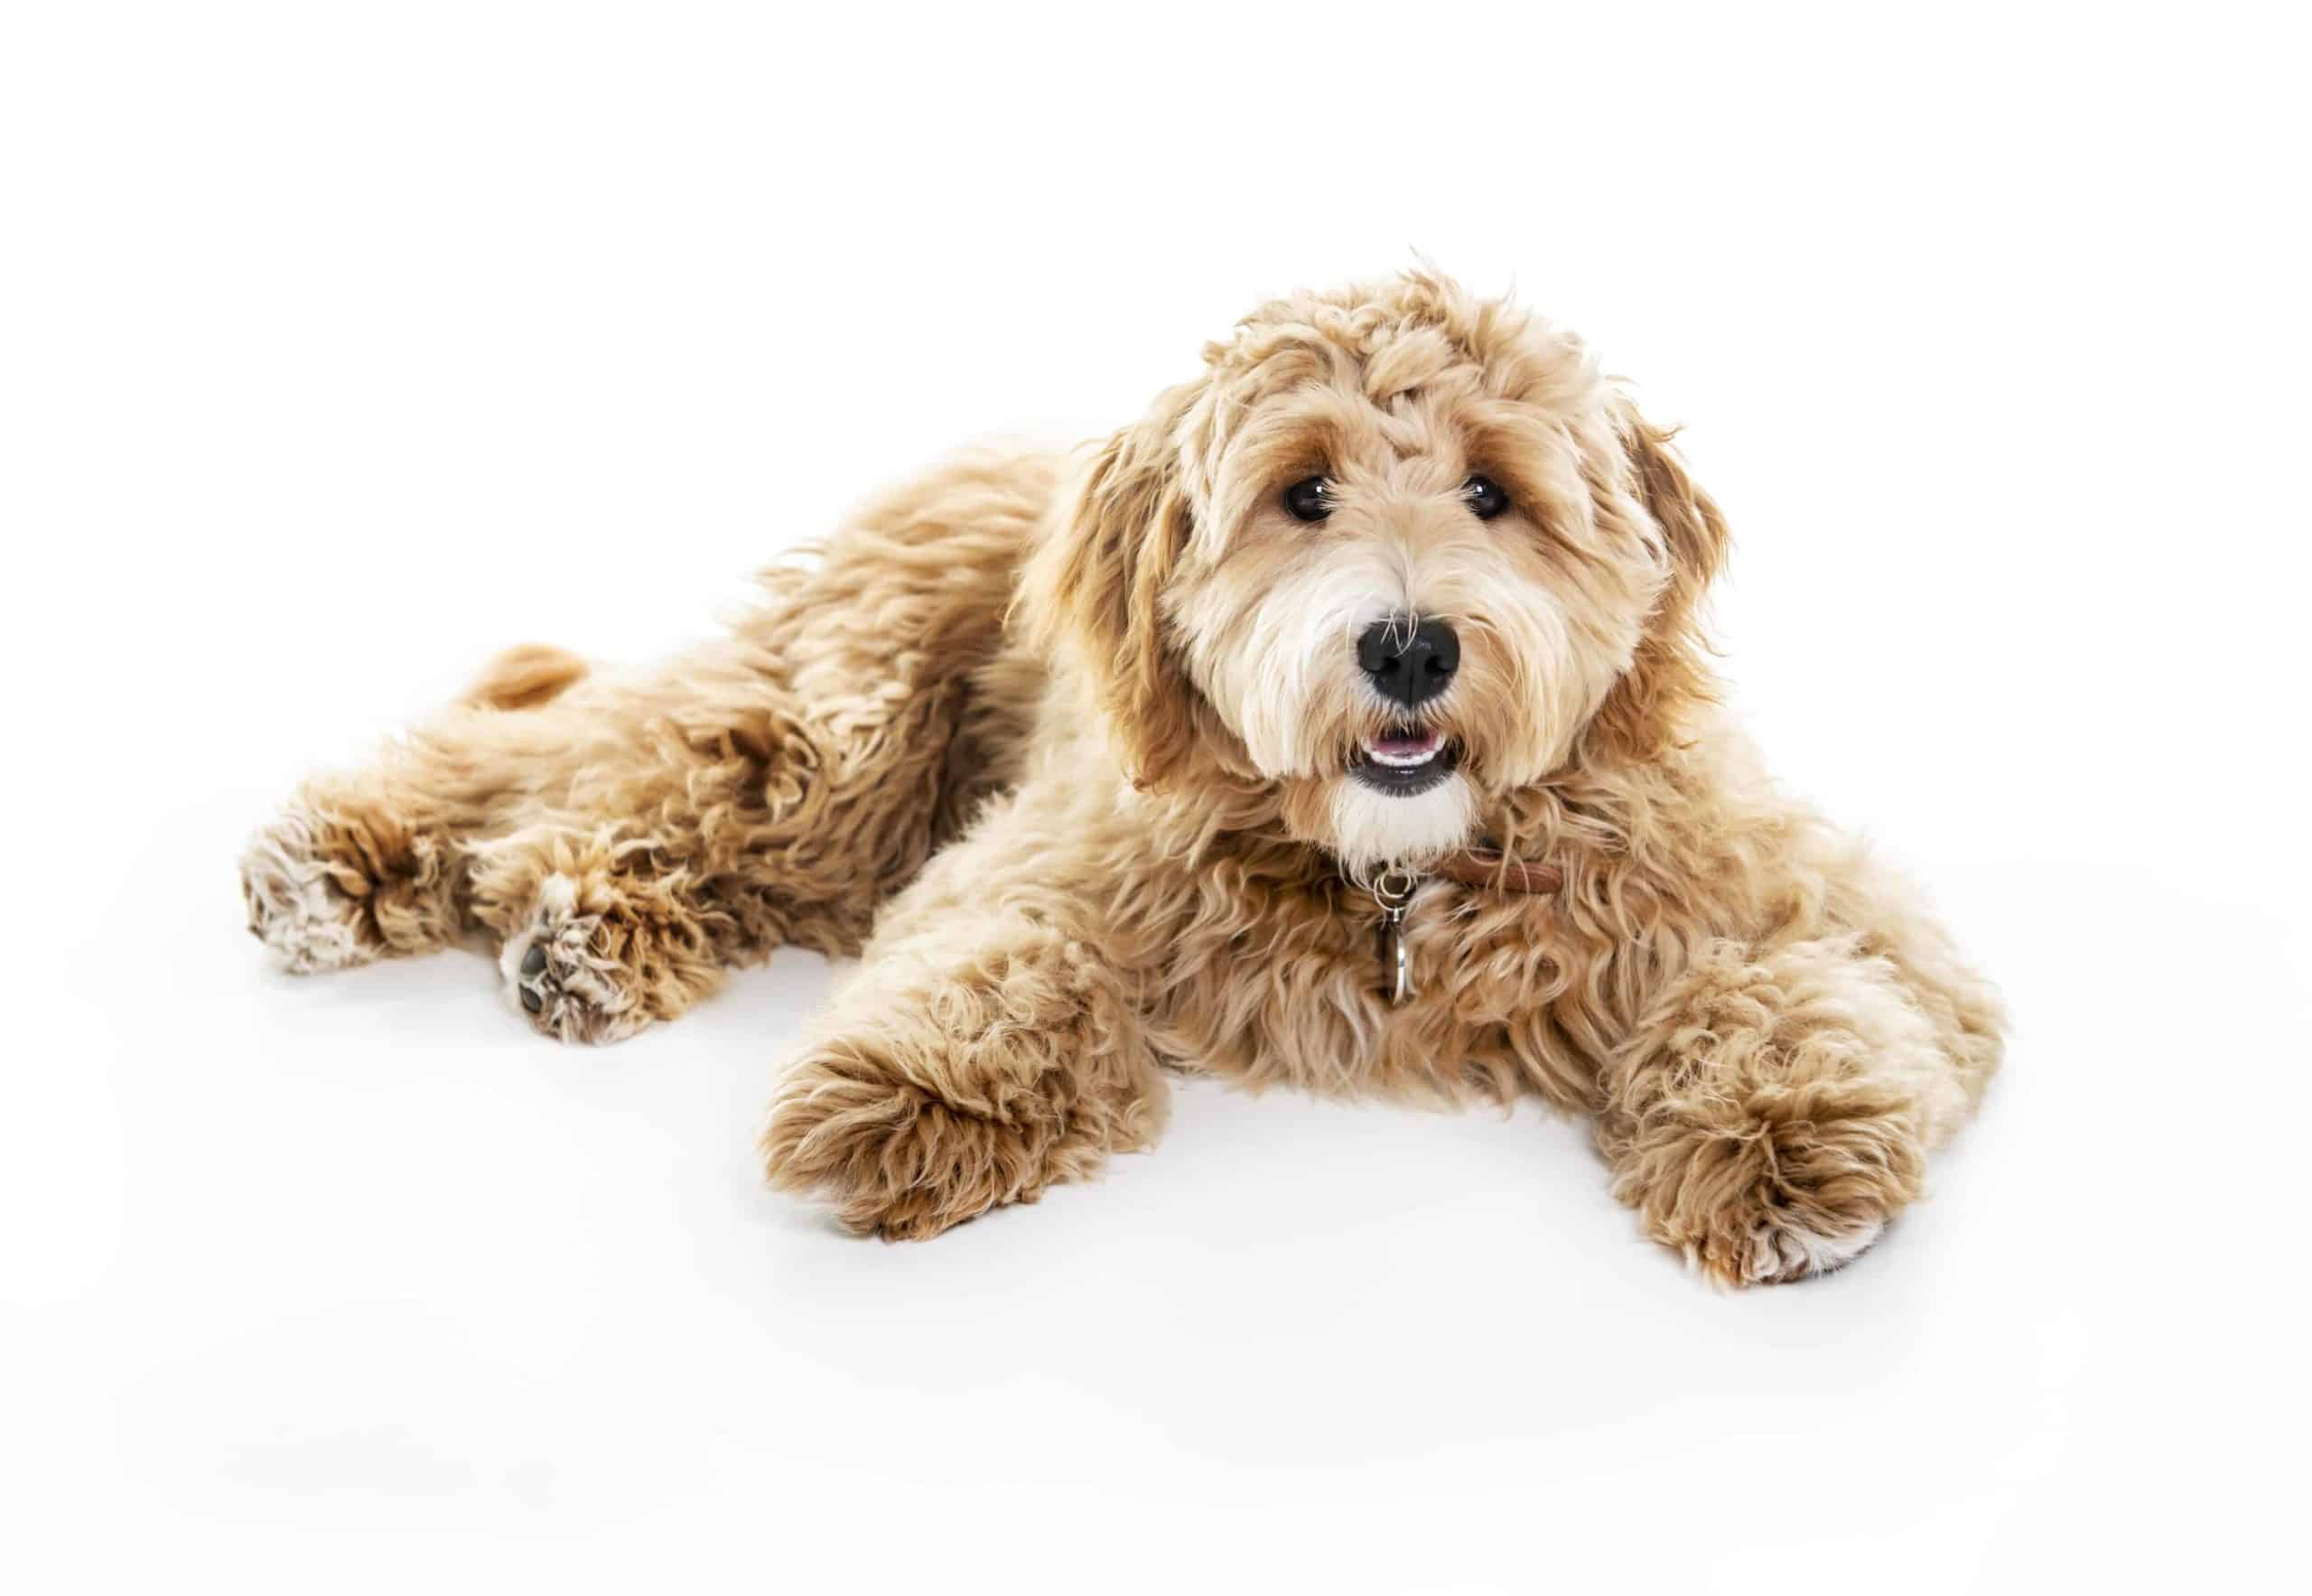 Labradoodle on white background. The Labradoodle is intelligent and friendly with strangers, which makes the dogs perfect companions for children and pets.